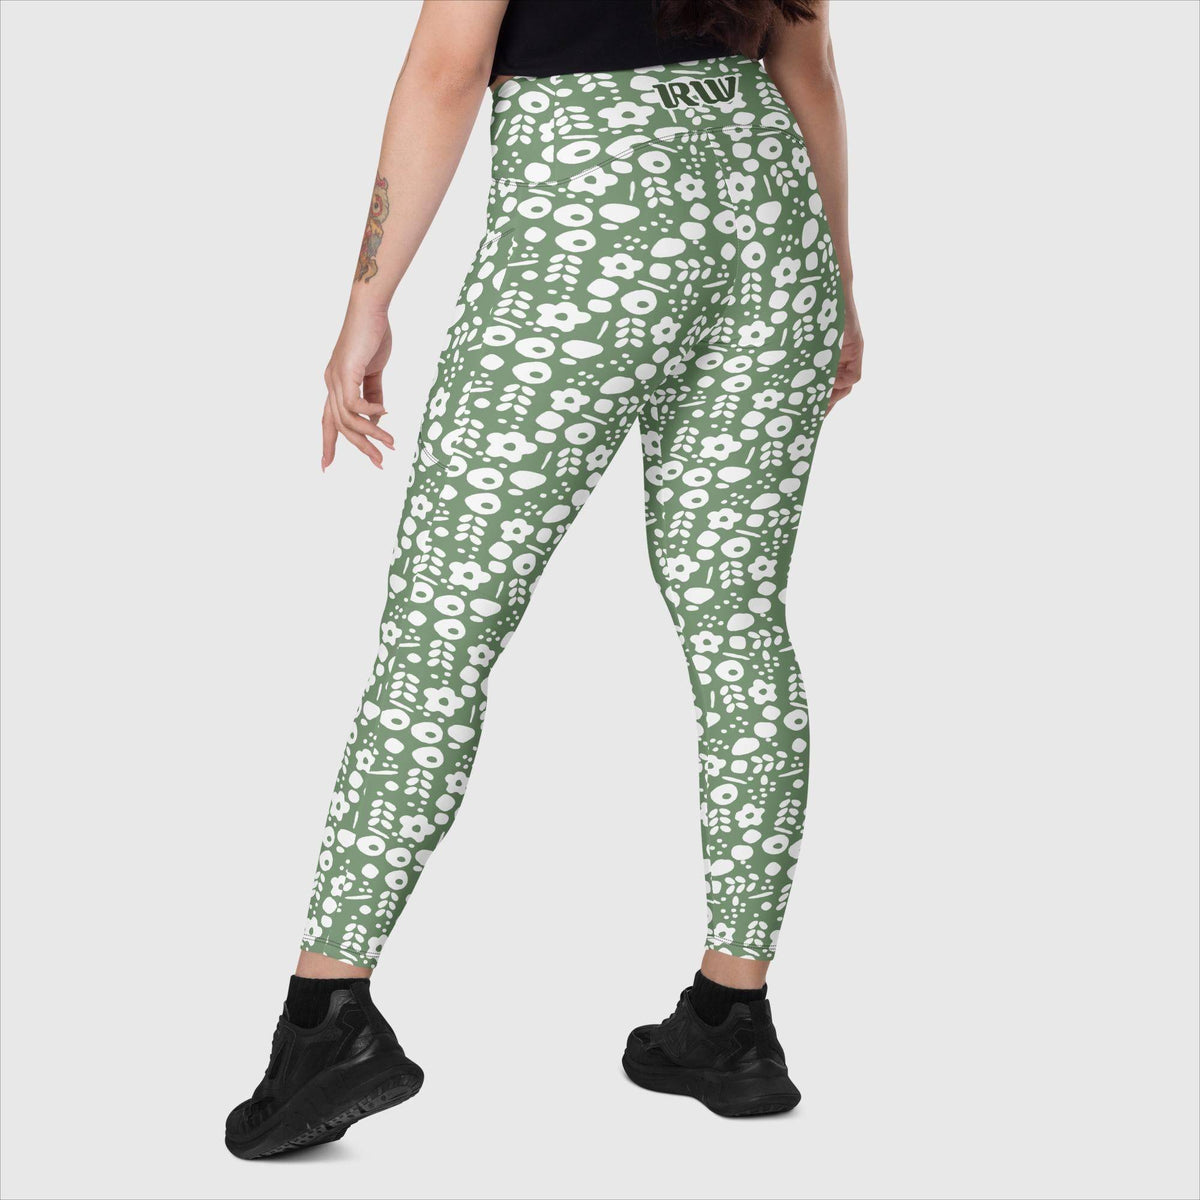 Women’s Leggings with Side Pockets High Waist Support - Revive Wear     Handmade Pocket Leggings for Yoga, Pilates &amp; Meditation. High-waisted cut, exceptional comfort and two practical side pockets. Get yours now!